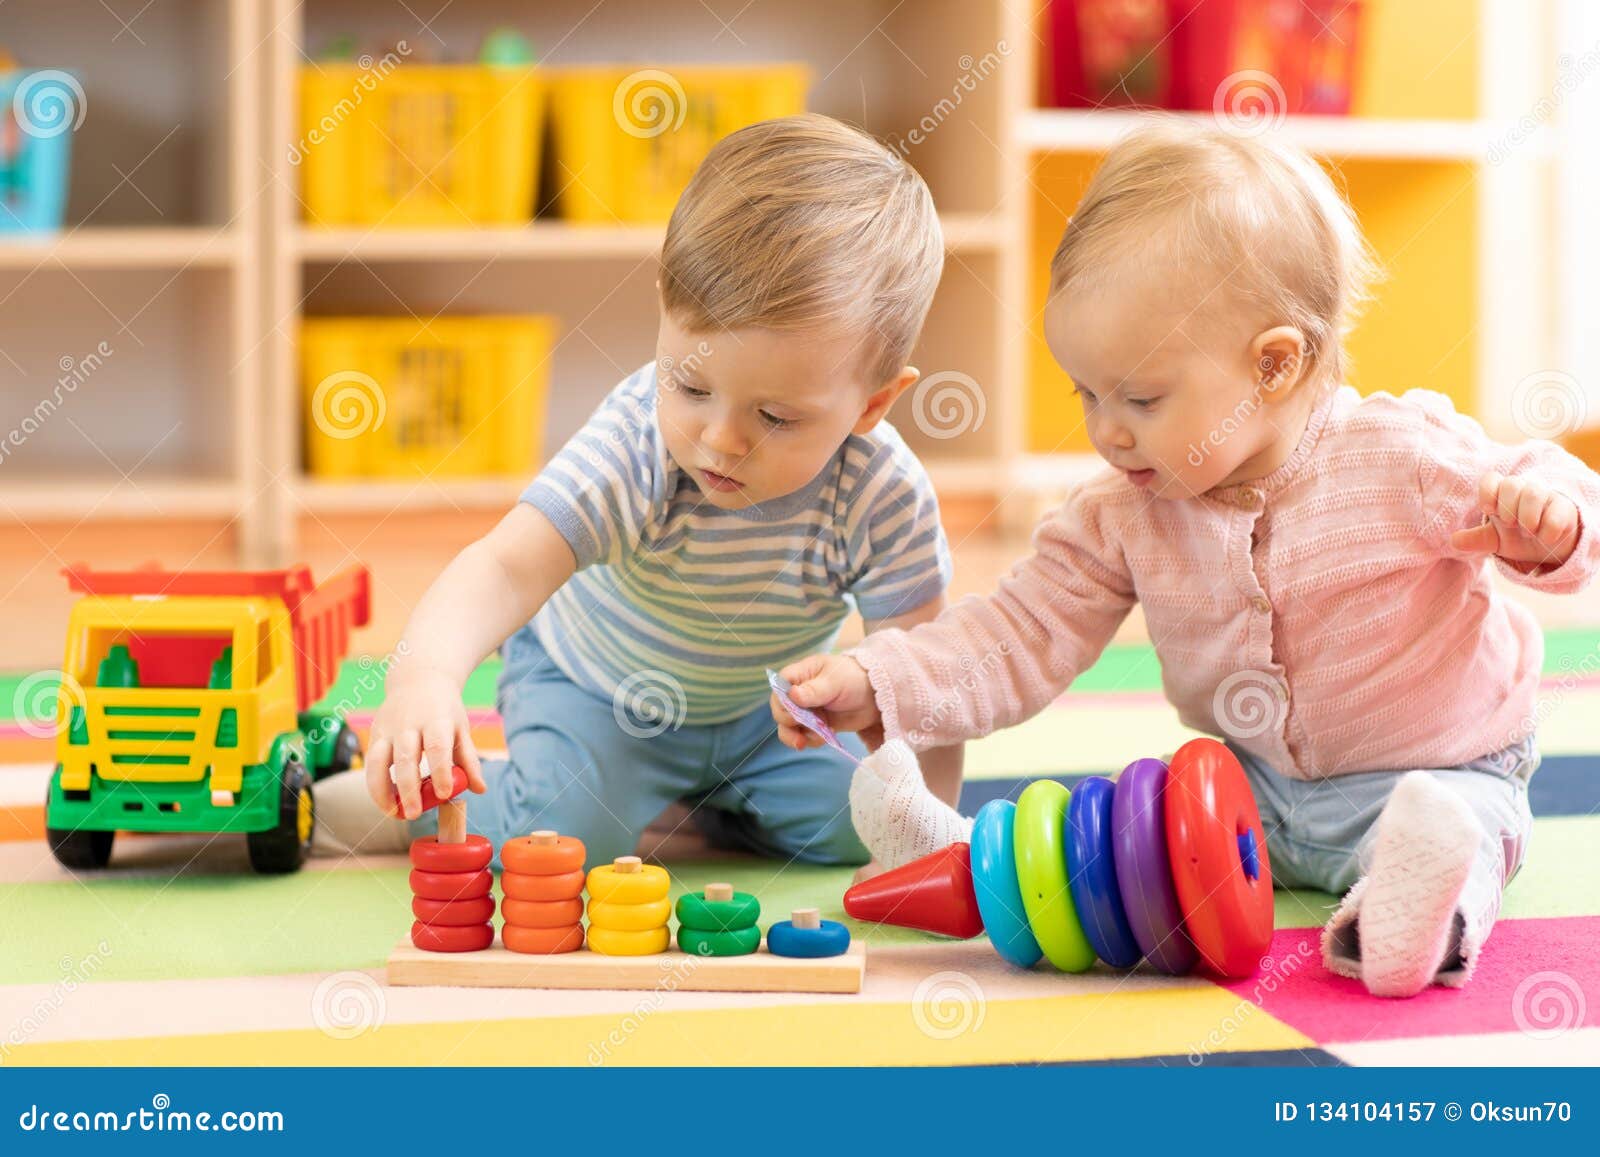 preschool boy and girl playing on floor with educational toys. children at home or daycare.